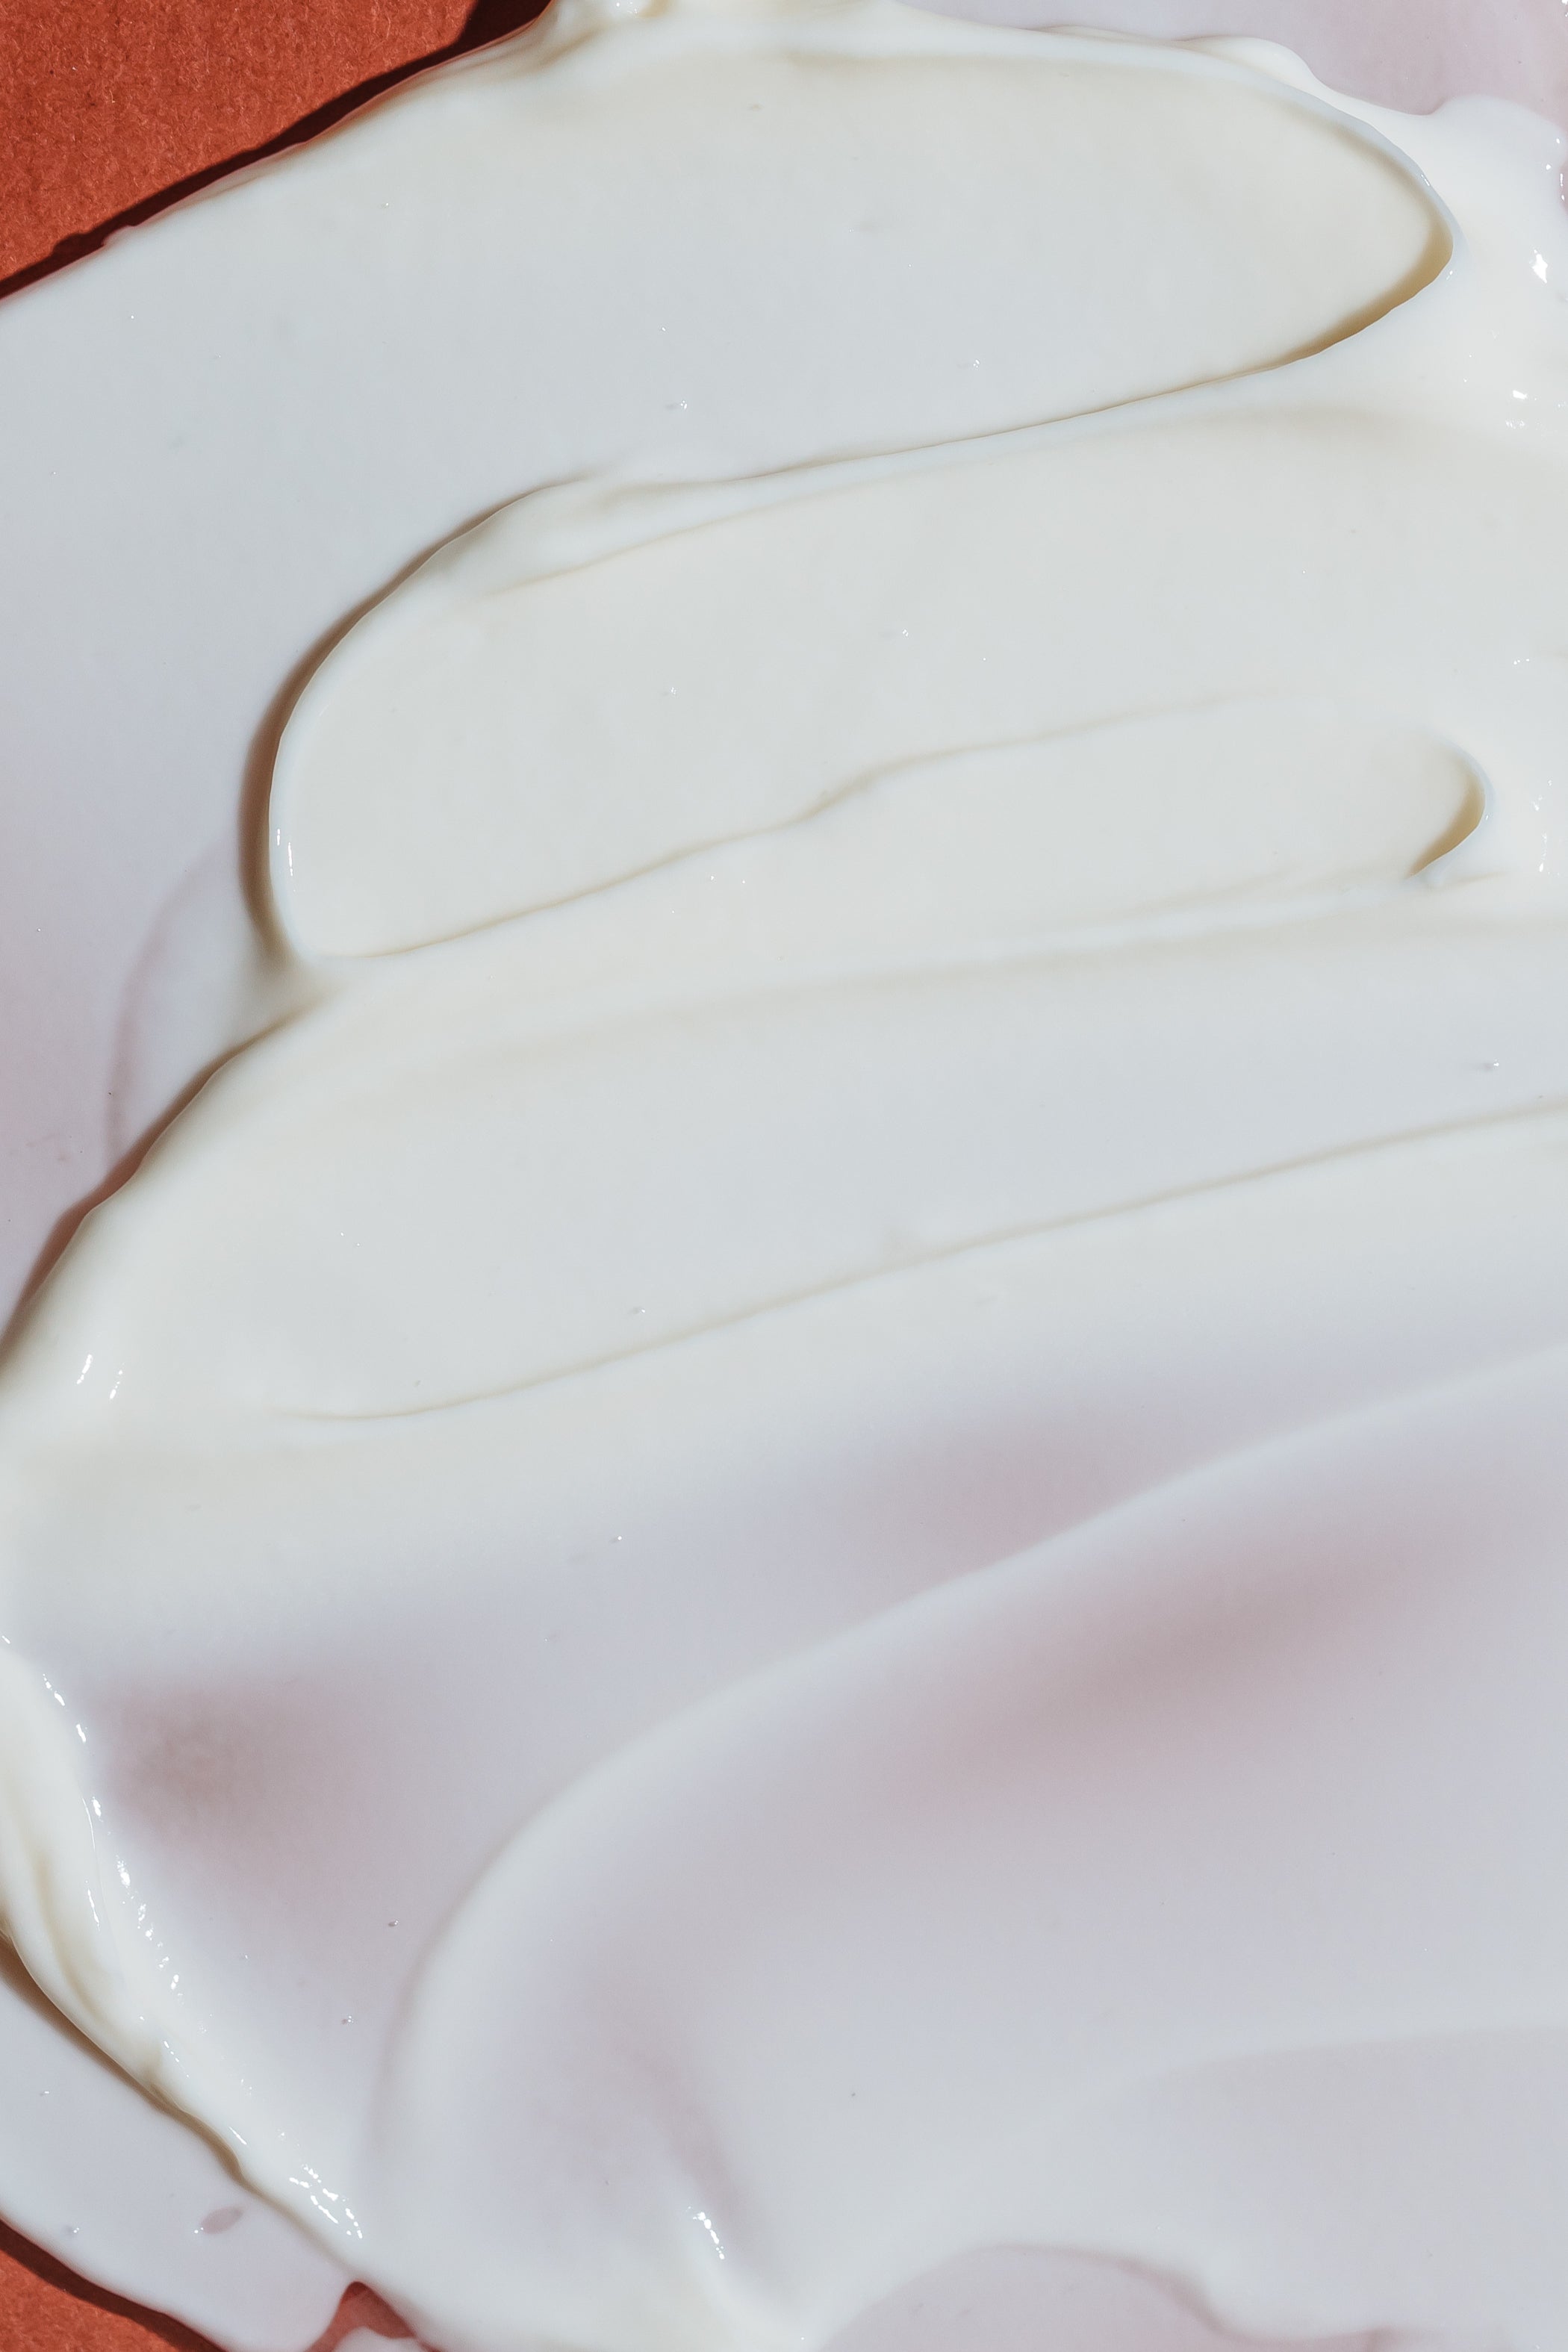 A texture photo showing the creaminess of the lotion